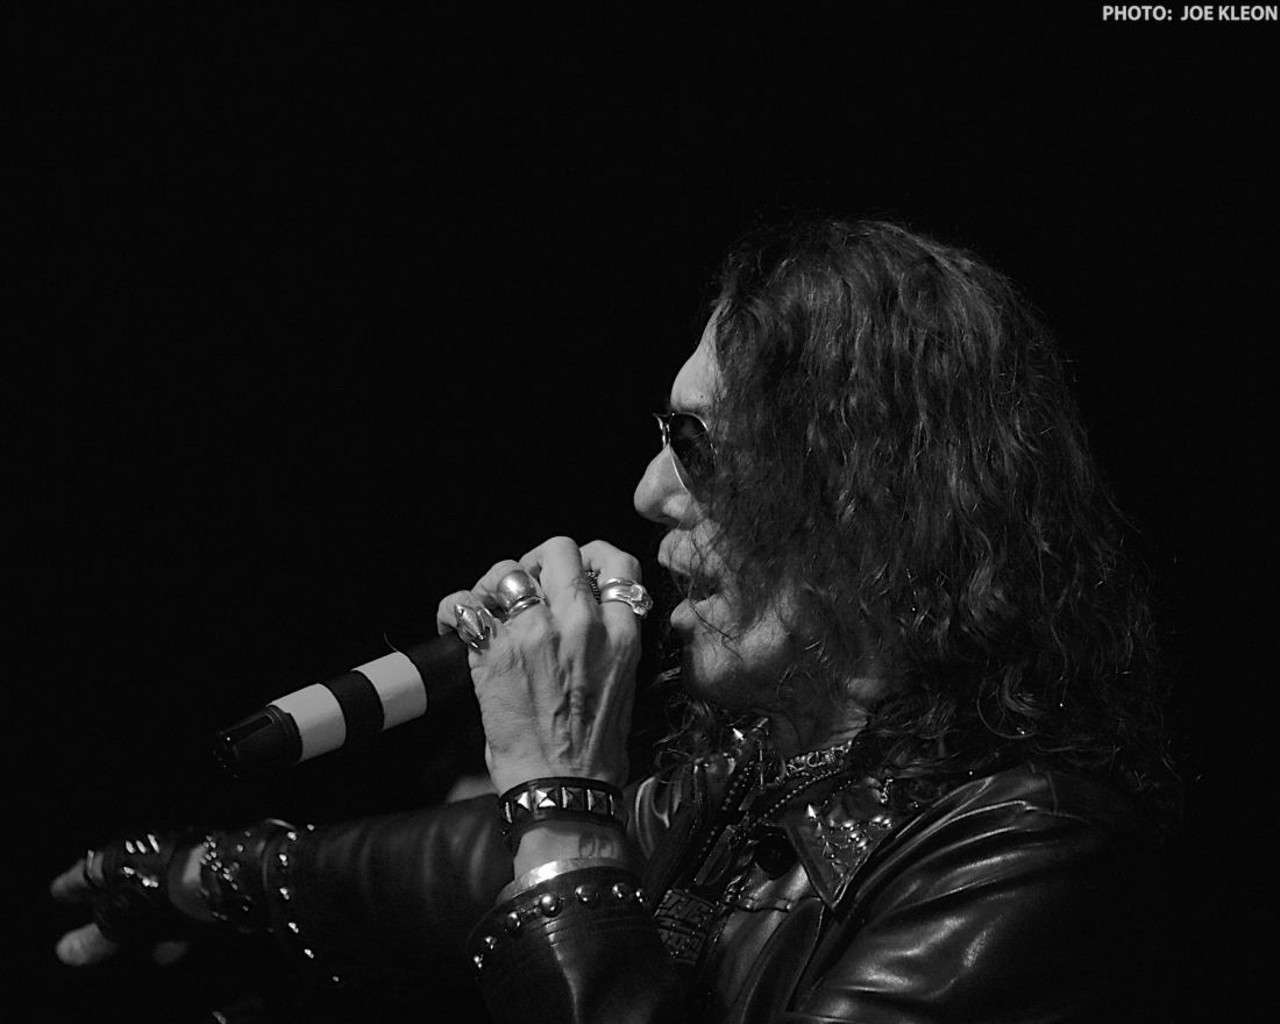 Stephen Pearcy Performing at the Kent Stage